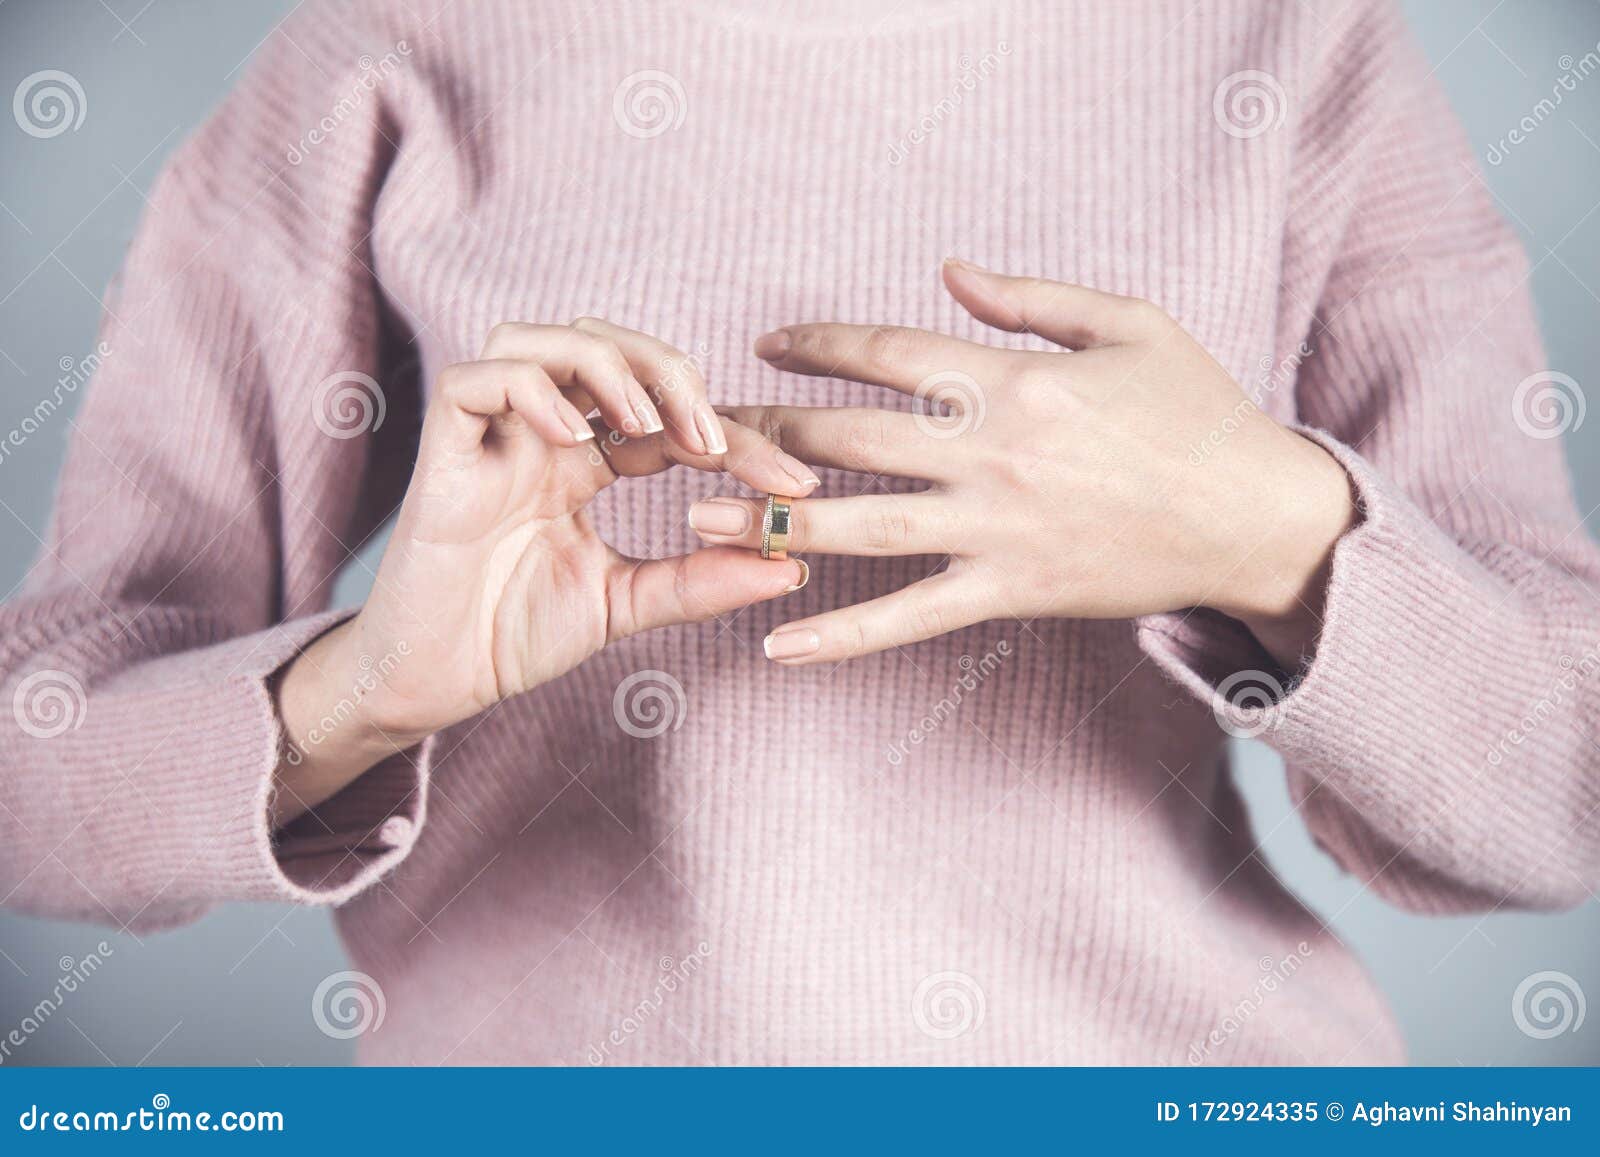 woman remove  ring